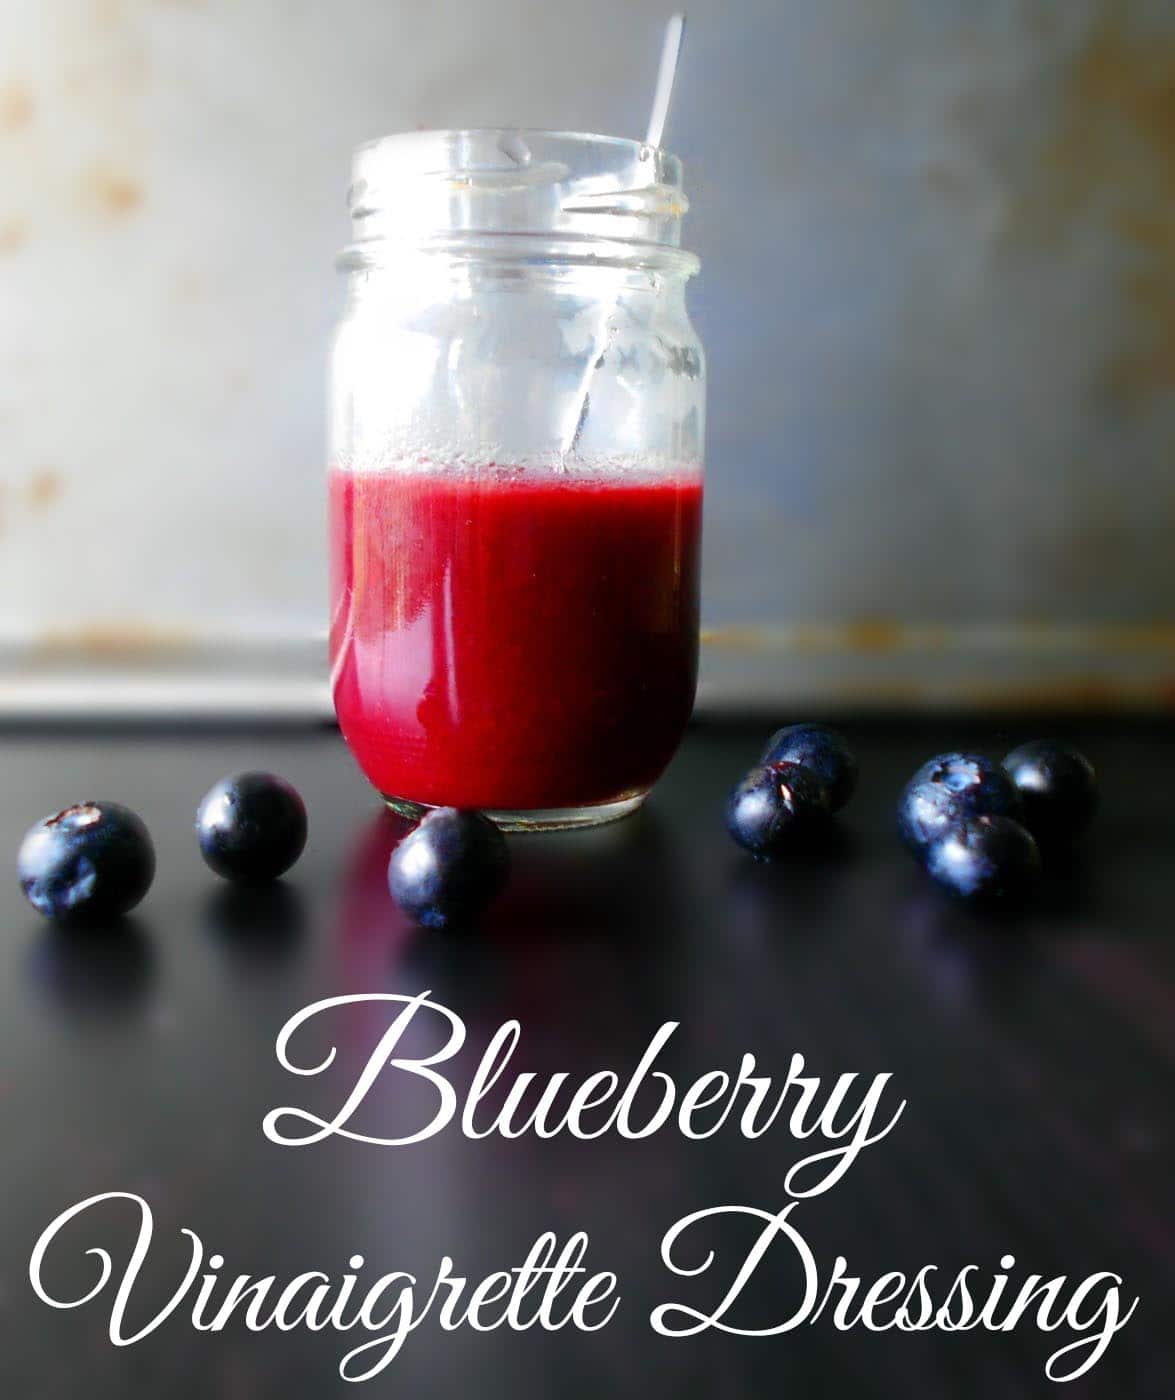 Front view of a glass bottle with Blueberry Vinaigrette surrounded by blueberries